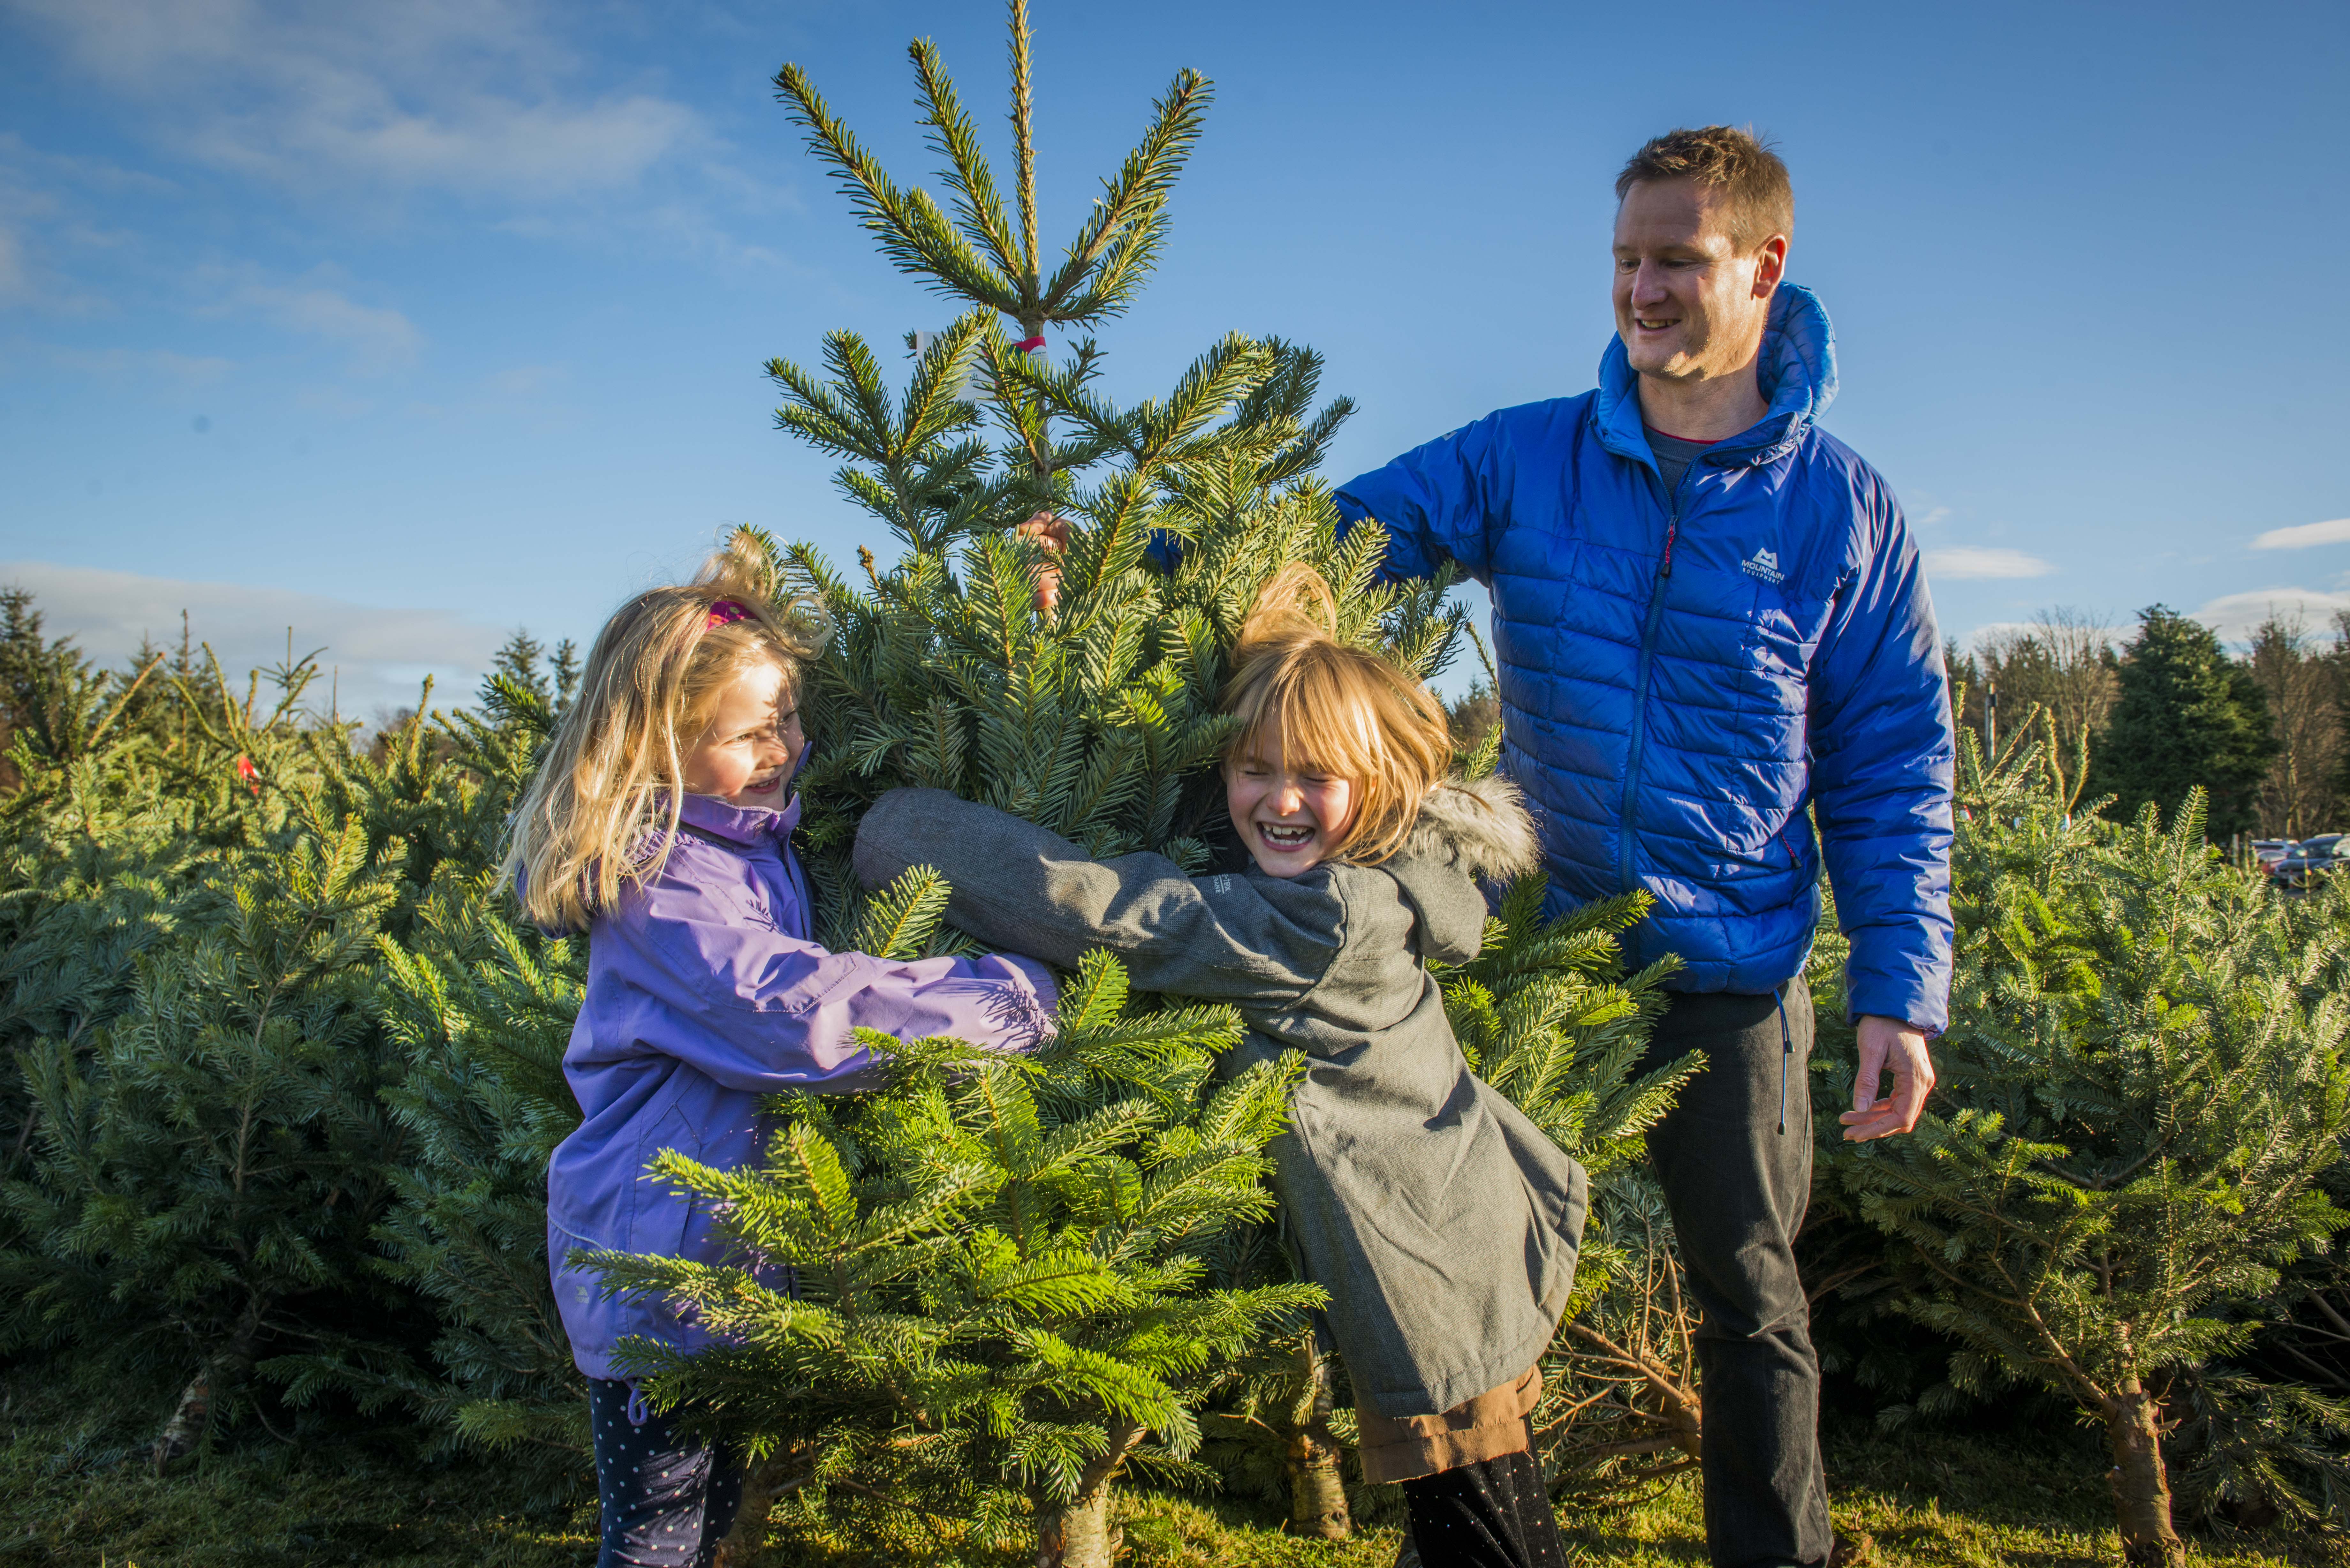 Man and two young girls choosing a Christmas tree.